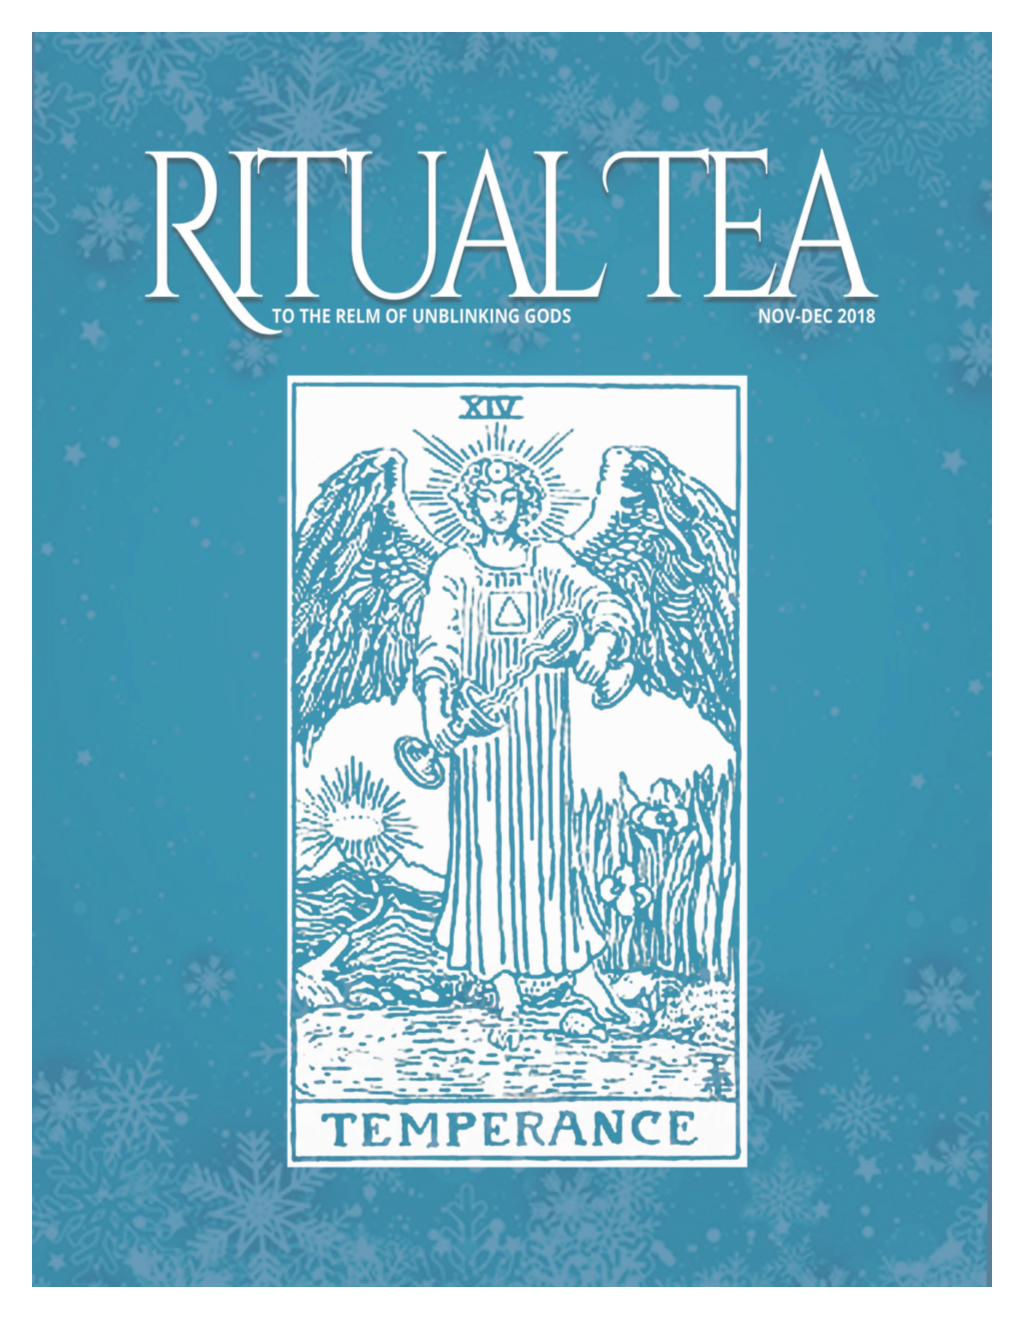 Ritual Tea All Images and Articles Are the Property of Tarot-N- Tea Unless Indicated